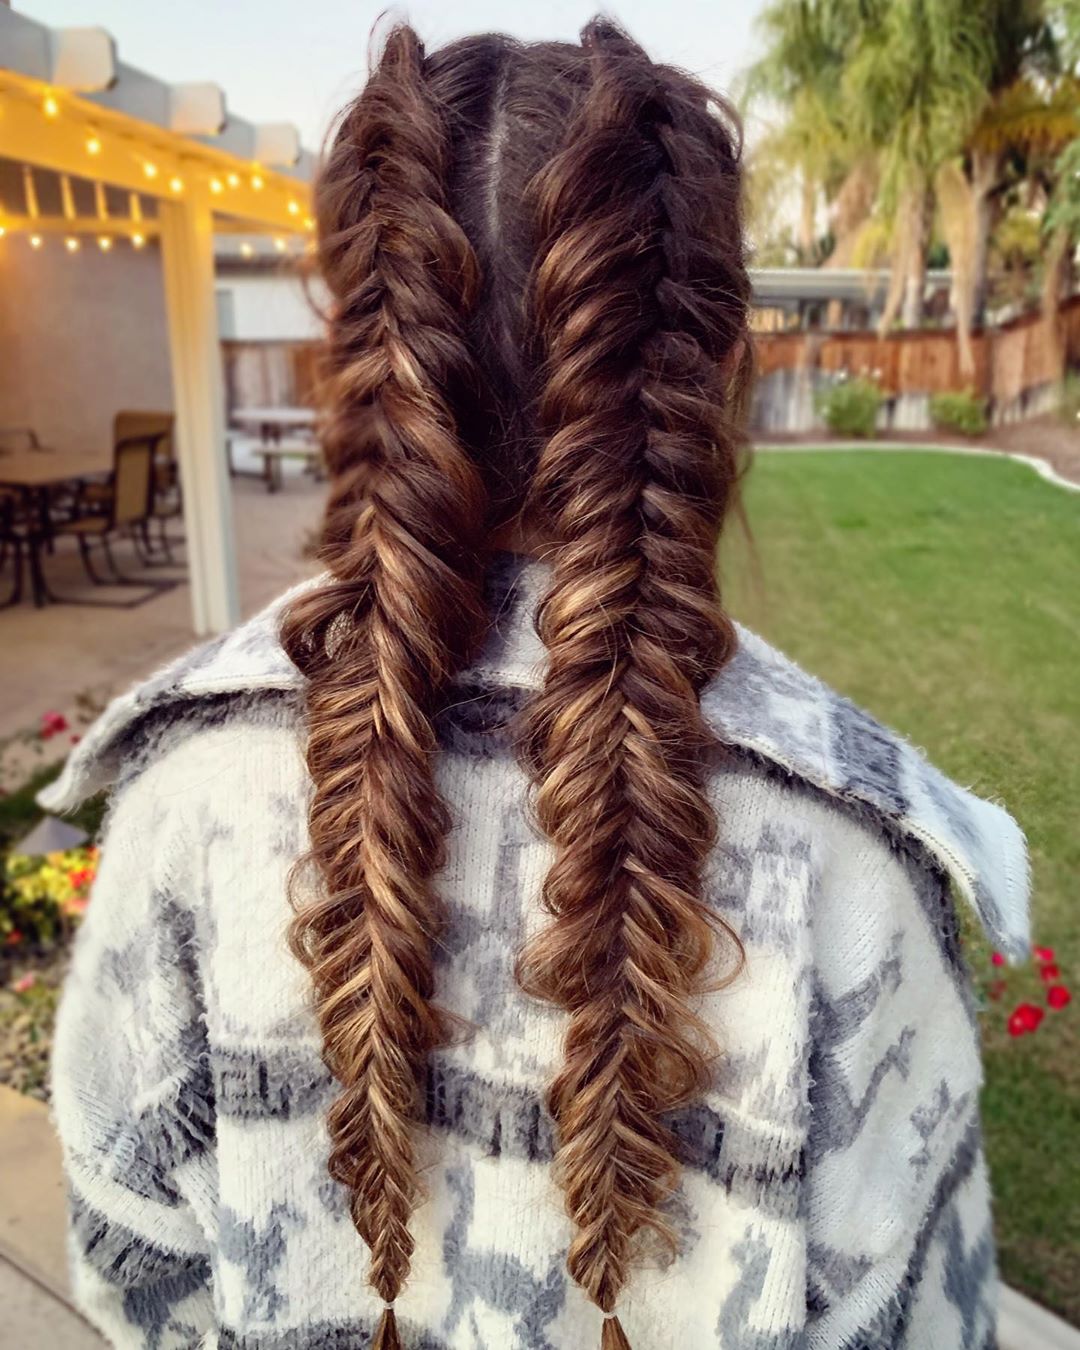 Updated 38 Luscious Long Hair Braided Hairstyles August 2020 Today, i will show you how to do bubble braids. long hair braided hairstyles